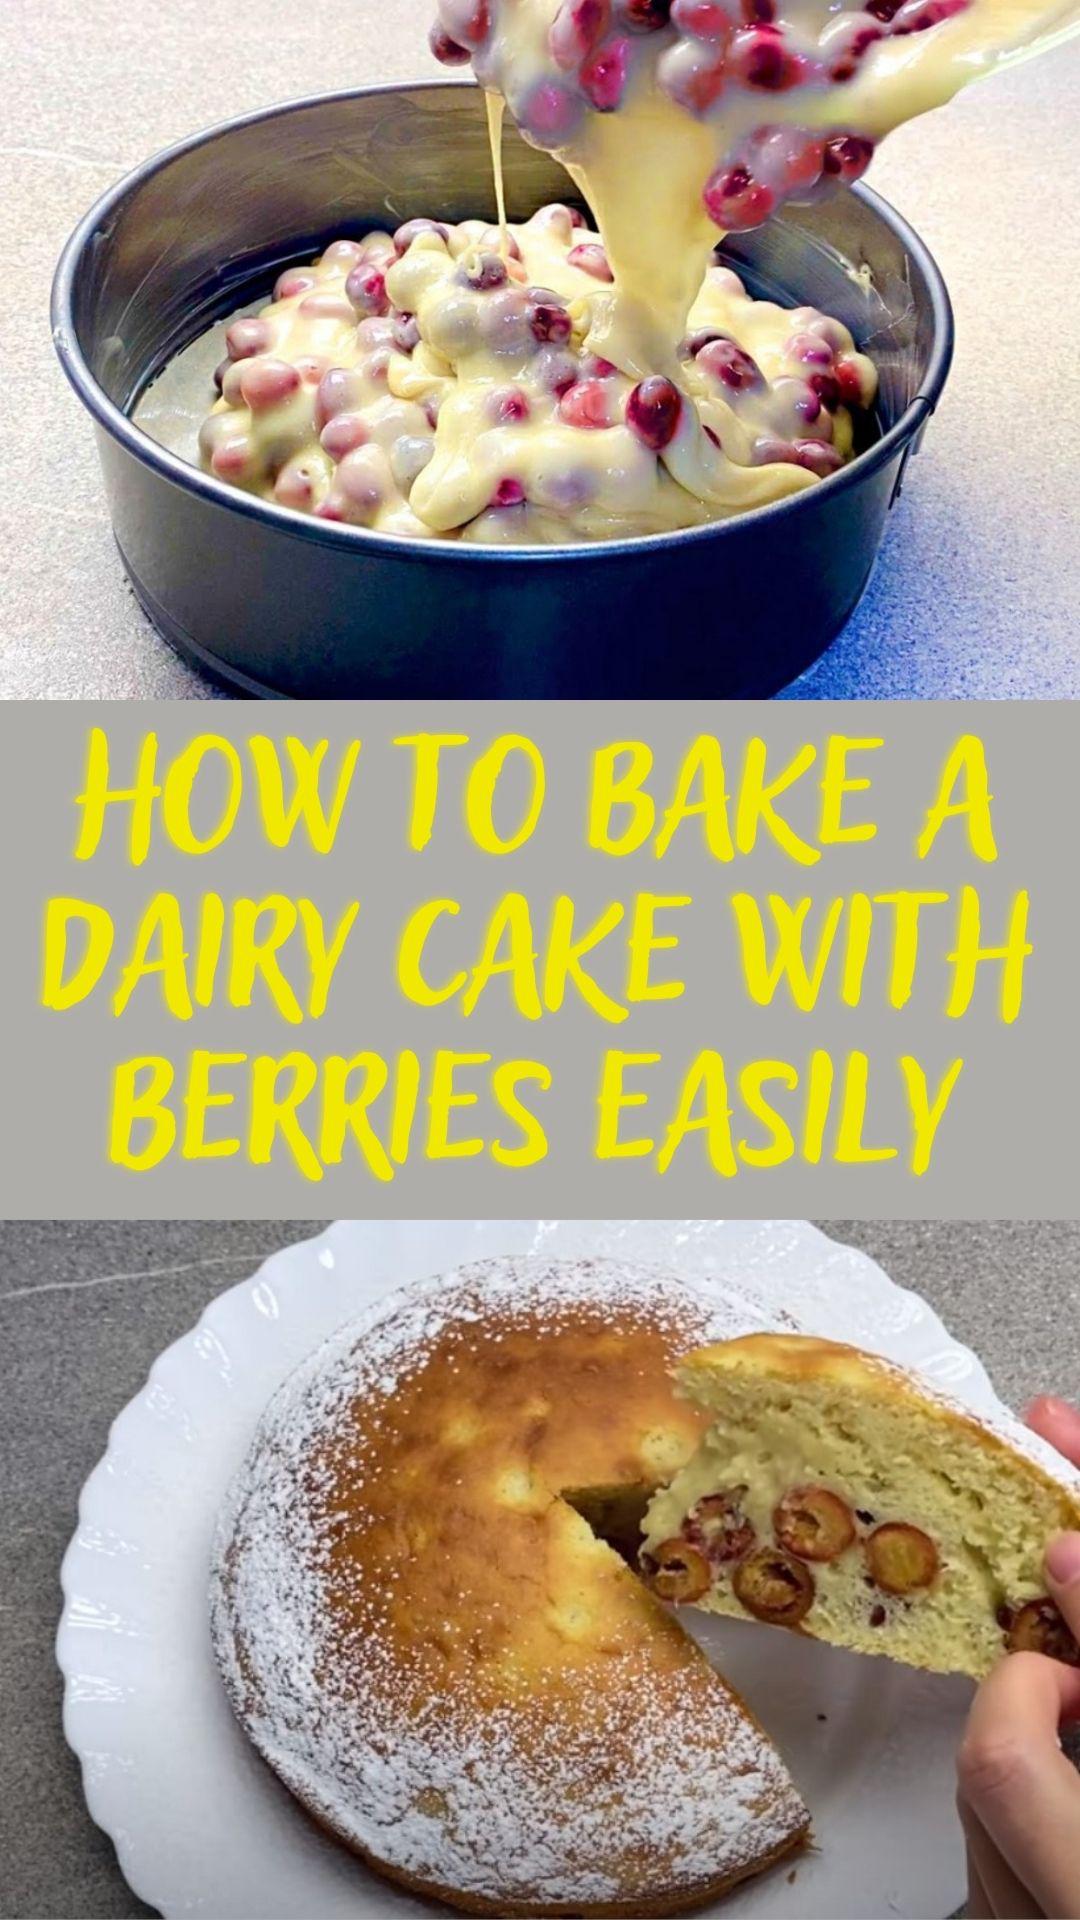 How to bake a dairy cake with berries easily